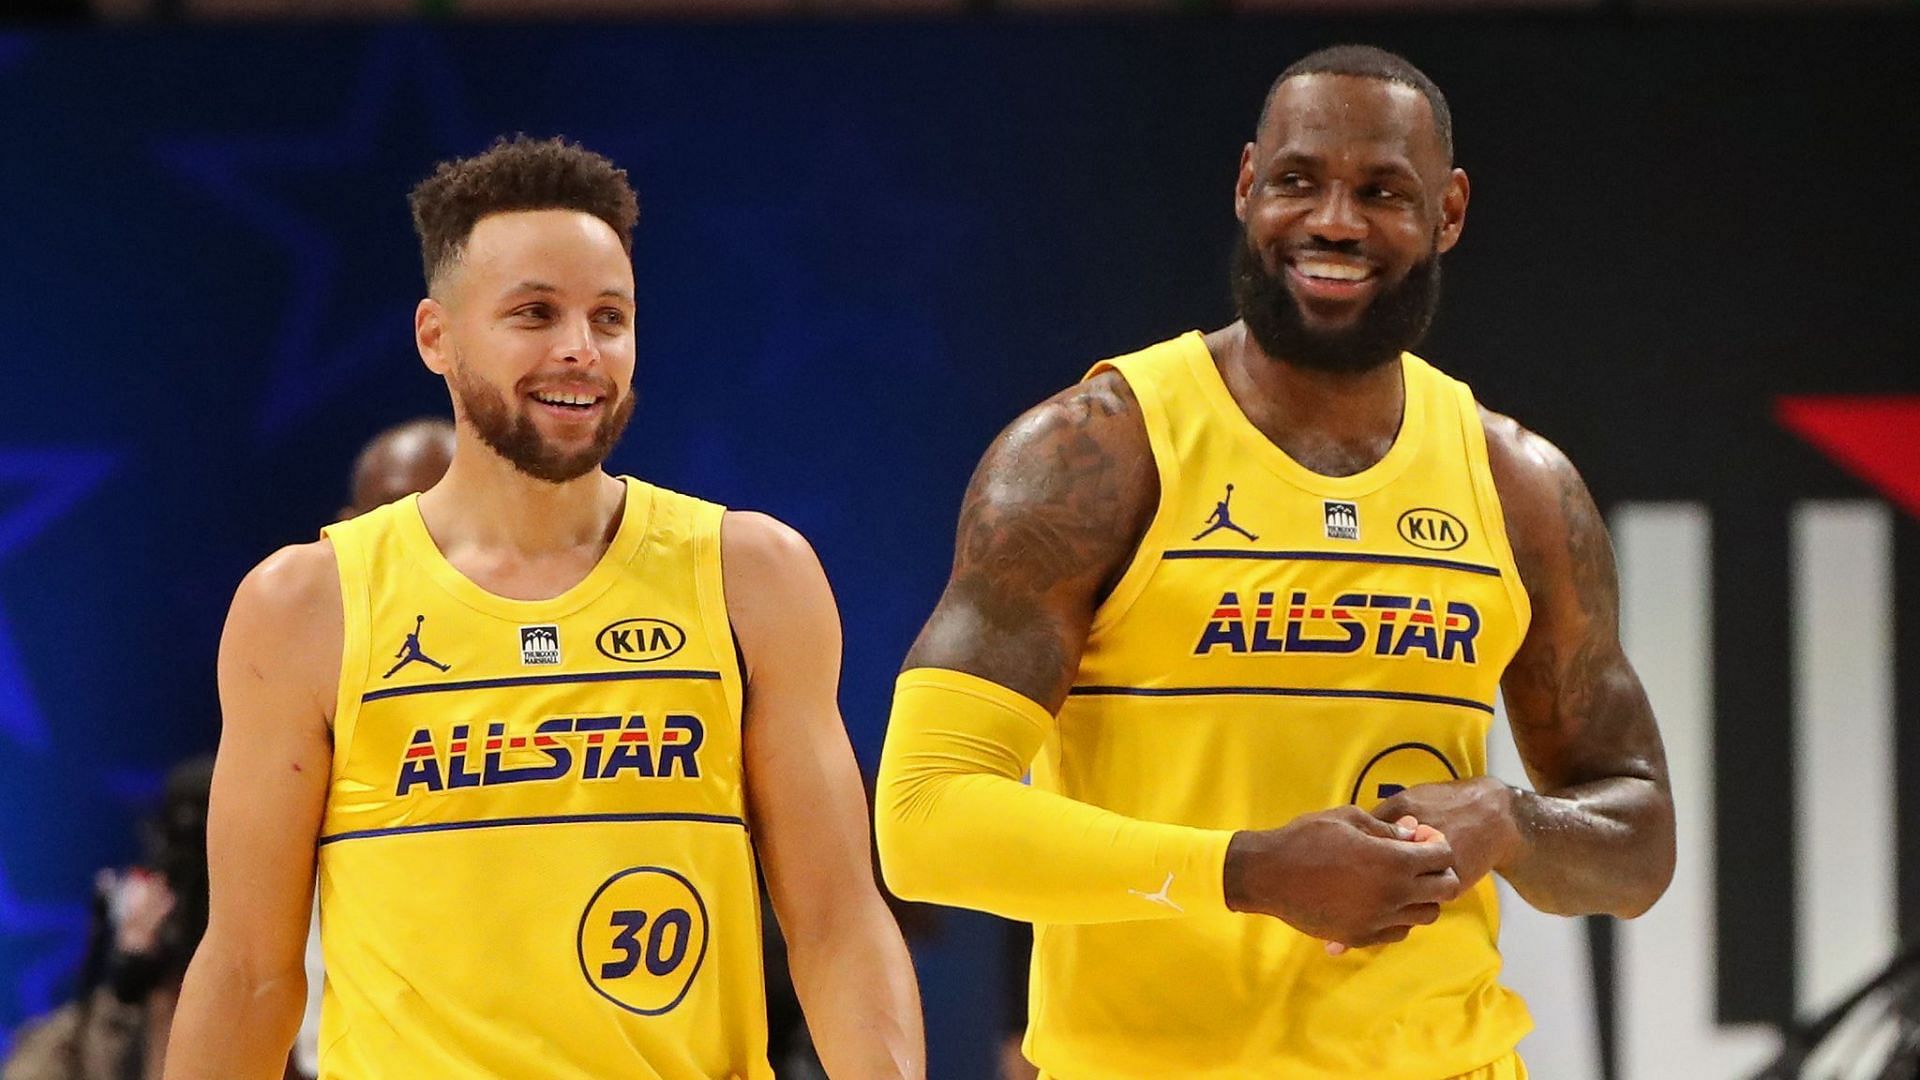 LeBron James, Steph Curry and more 5 NBA players who have most social